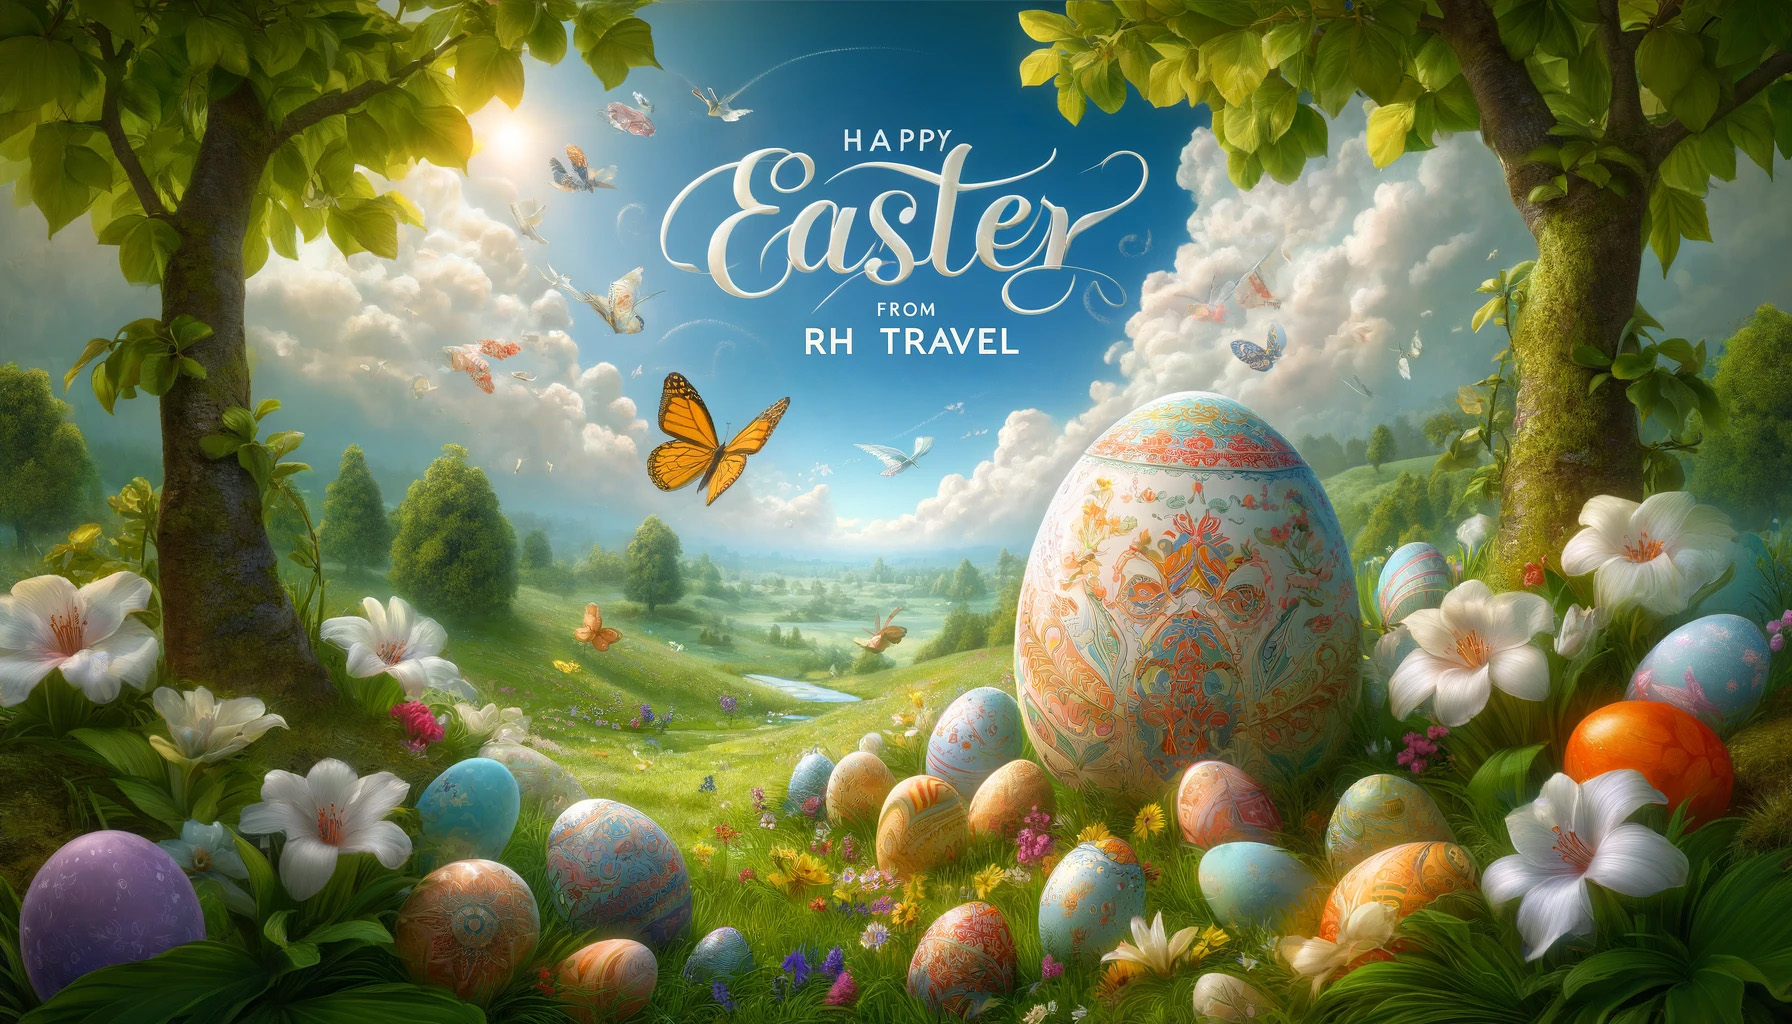 Happy Easter from All of Us at RH Travel!